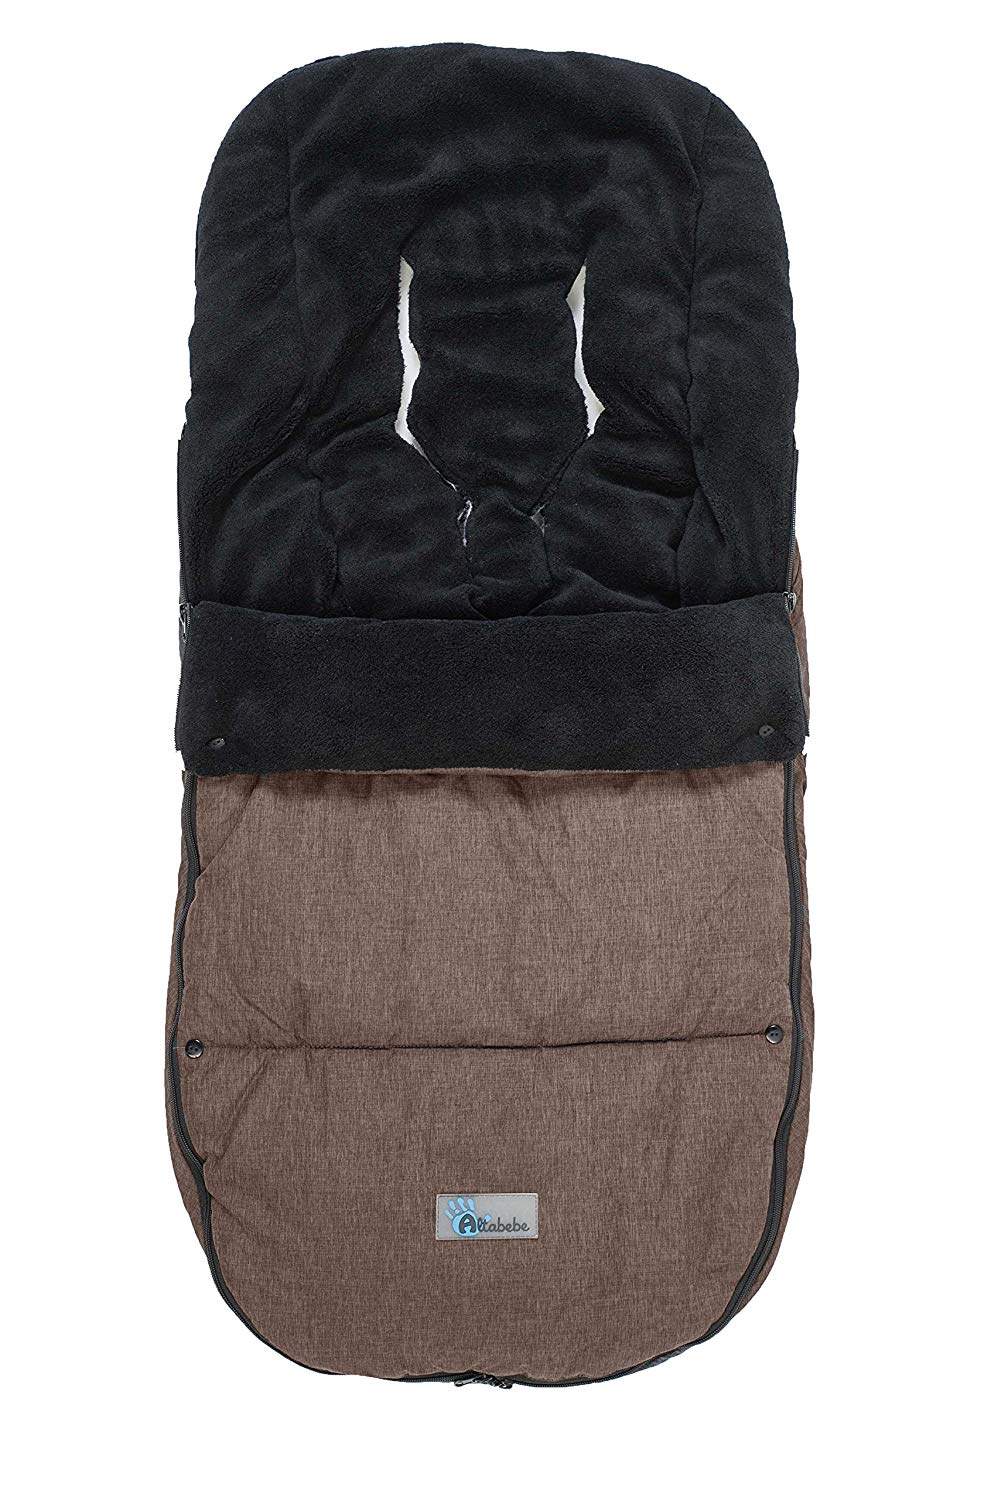 Altabebe AL2280P-06 Travel Winter Foot Muff for Bugaboo and Joolz Olive / Black